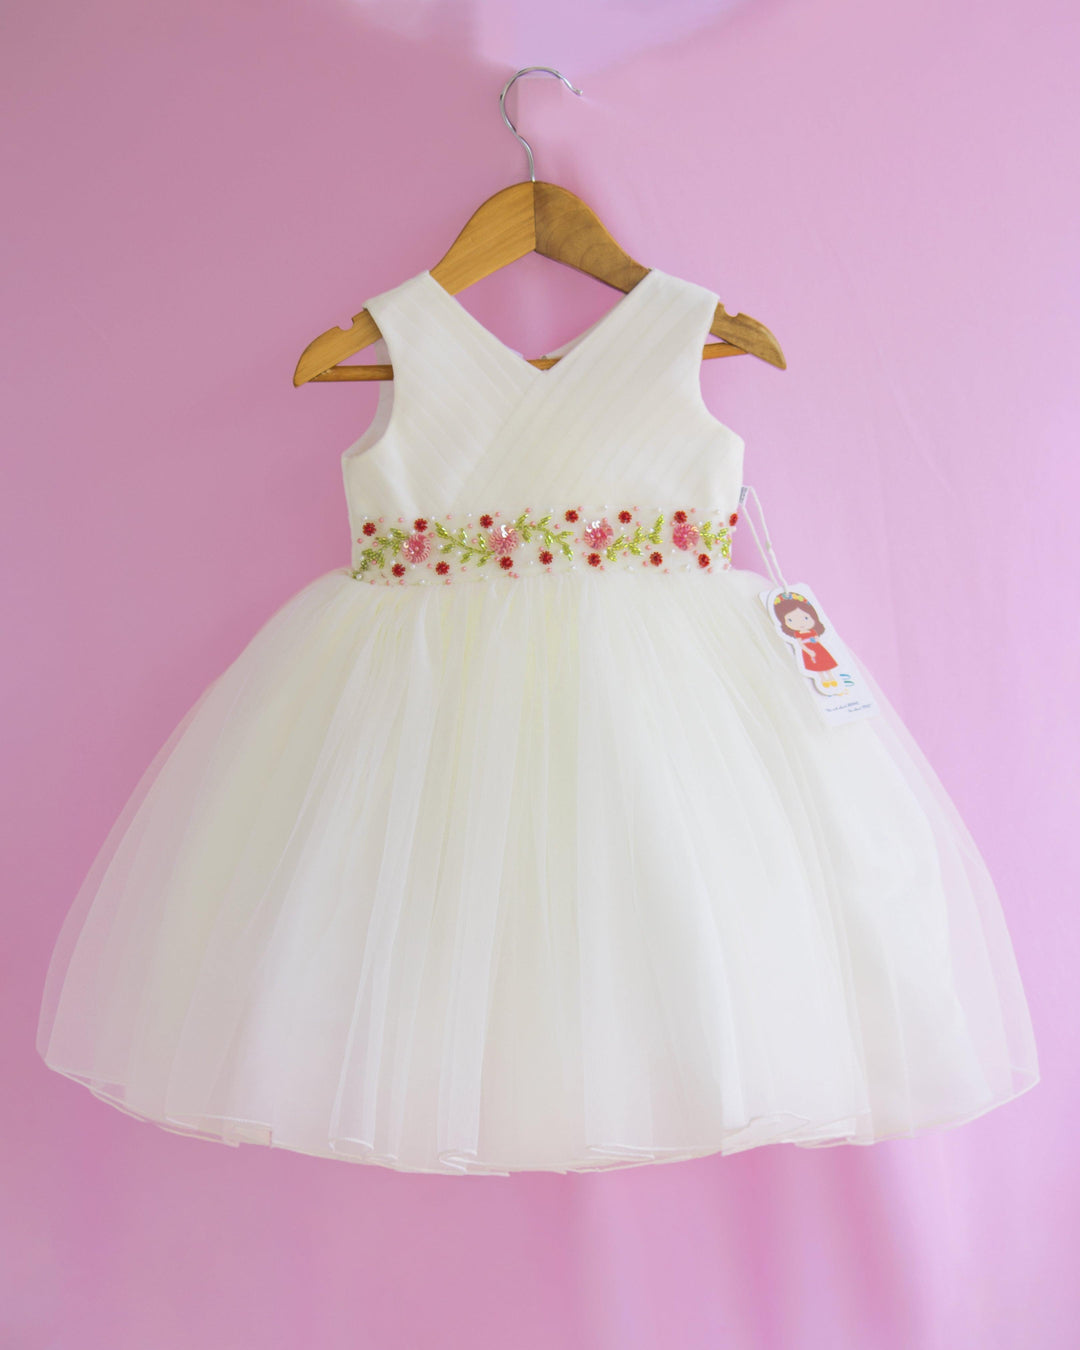 Off-white Shade Pleated Handwork Baby-Girls Sleeveless Frock
Material : Off-white shade pleated party perfect handwork frock is made with soft nylon net fabric. The yoke portion of the frock is designed in pleated with V-neck